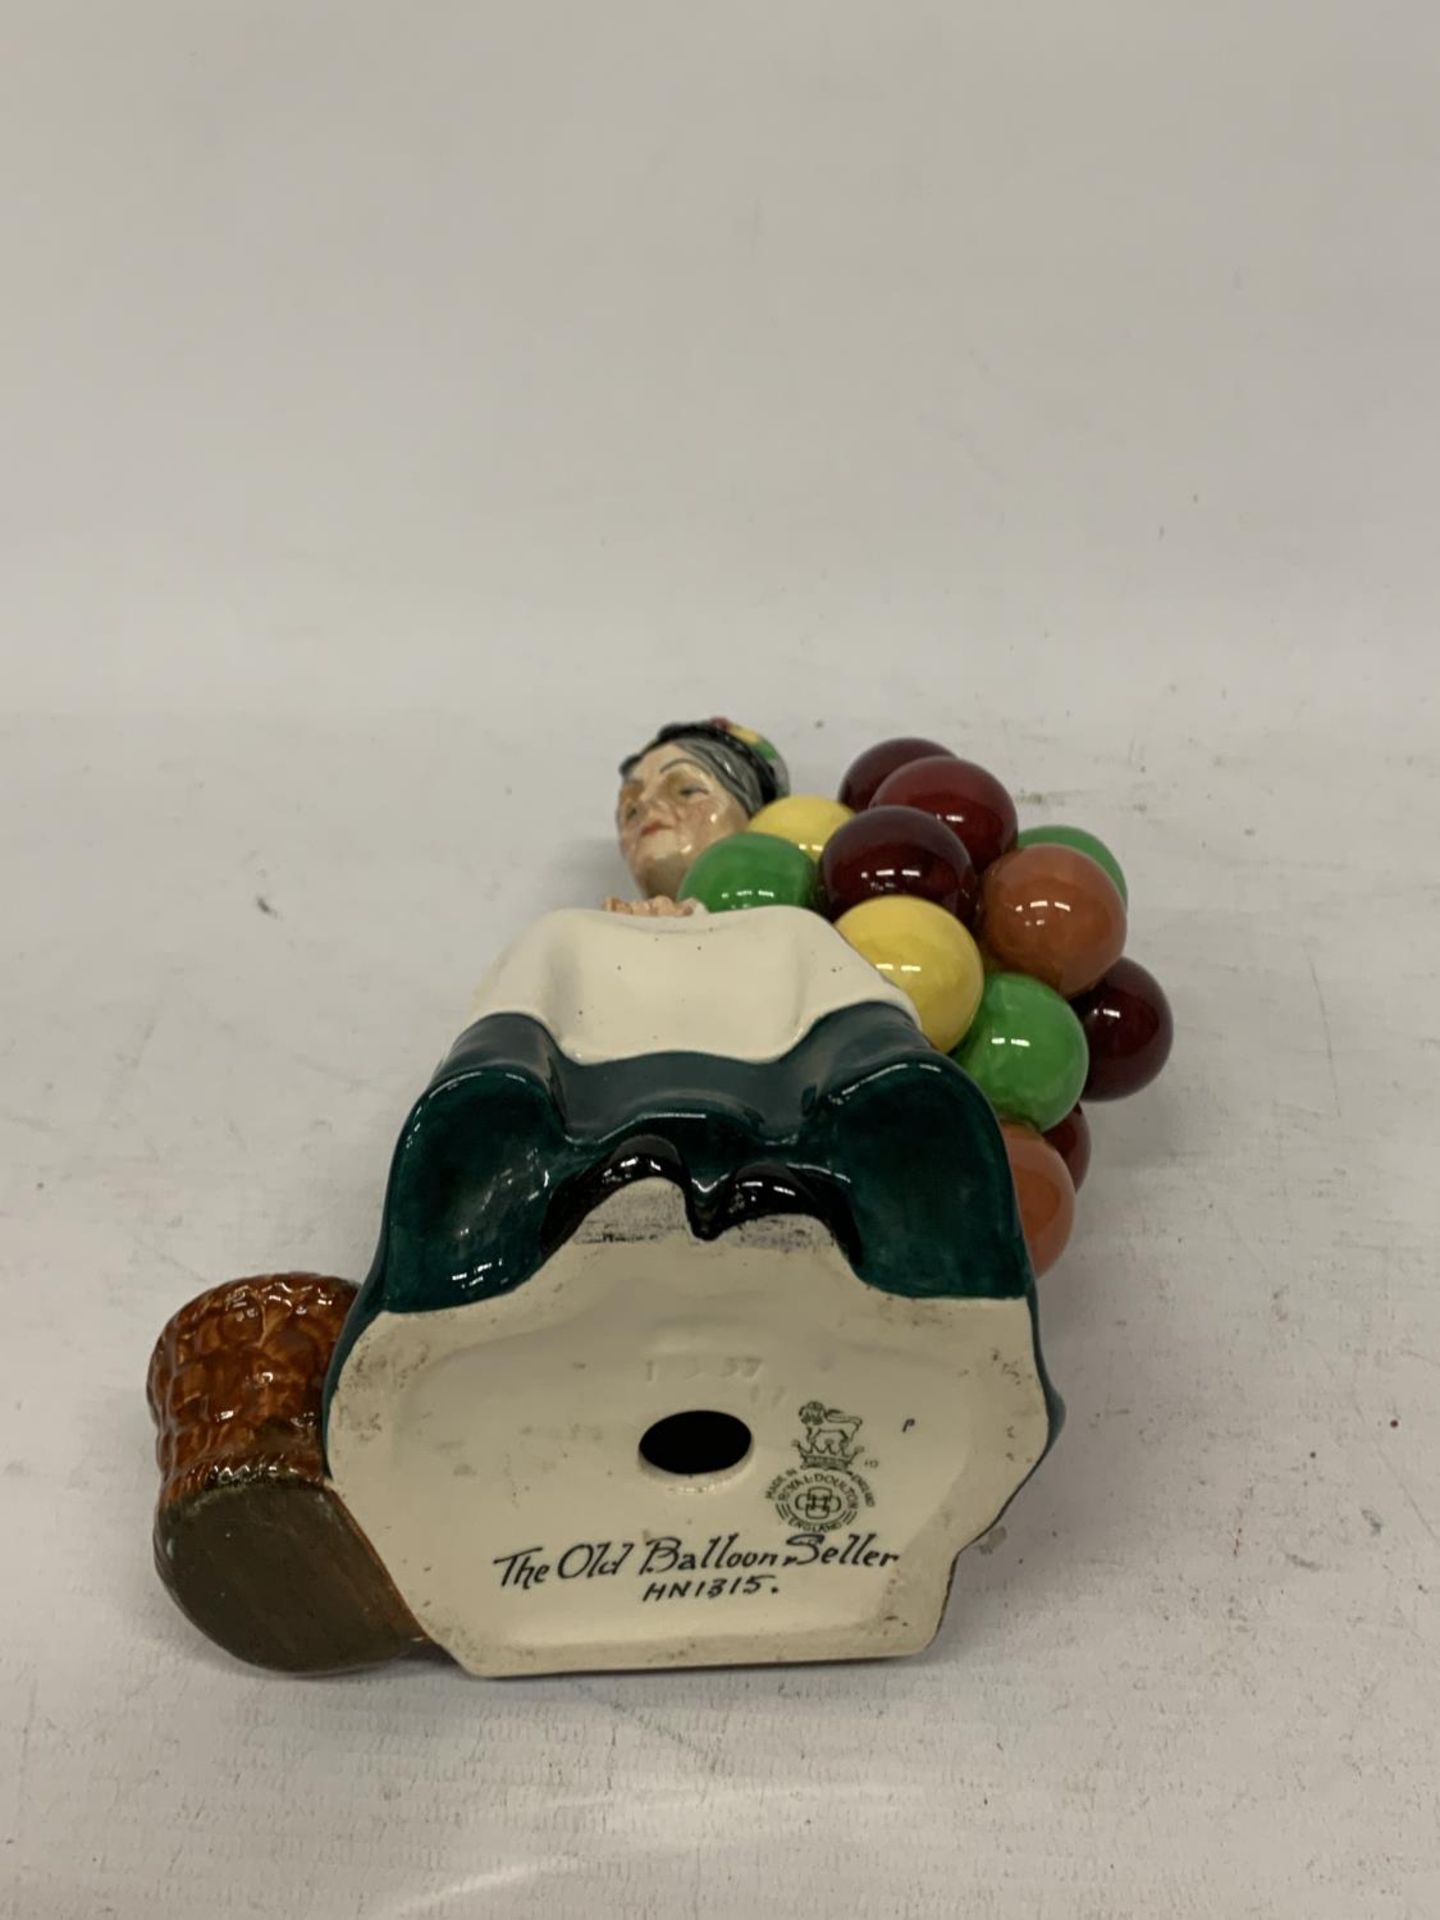 A ROYAL DOULTON FIGURE OF "THE OLD BALLOON SELLER" HN 1315 - Image 3 of 3